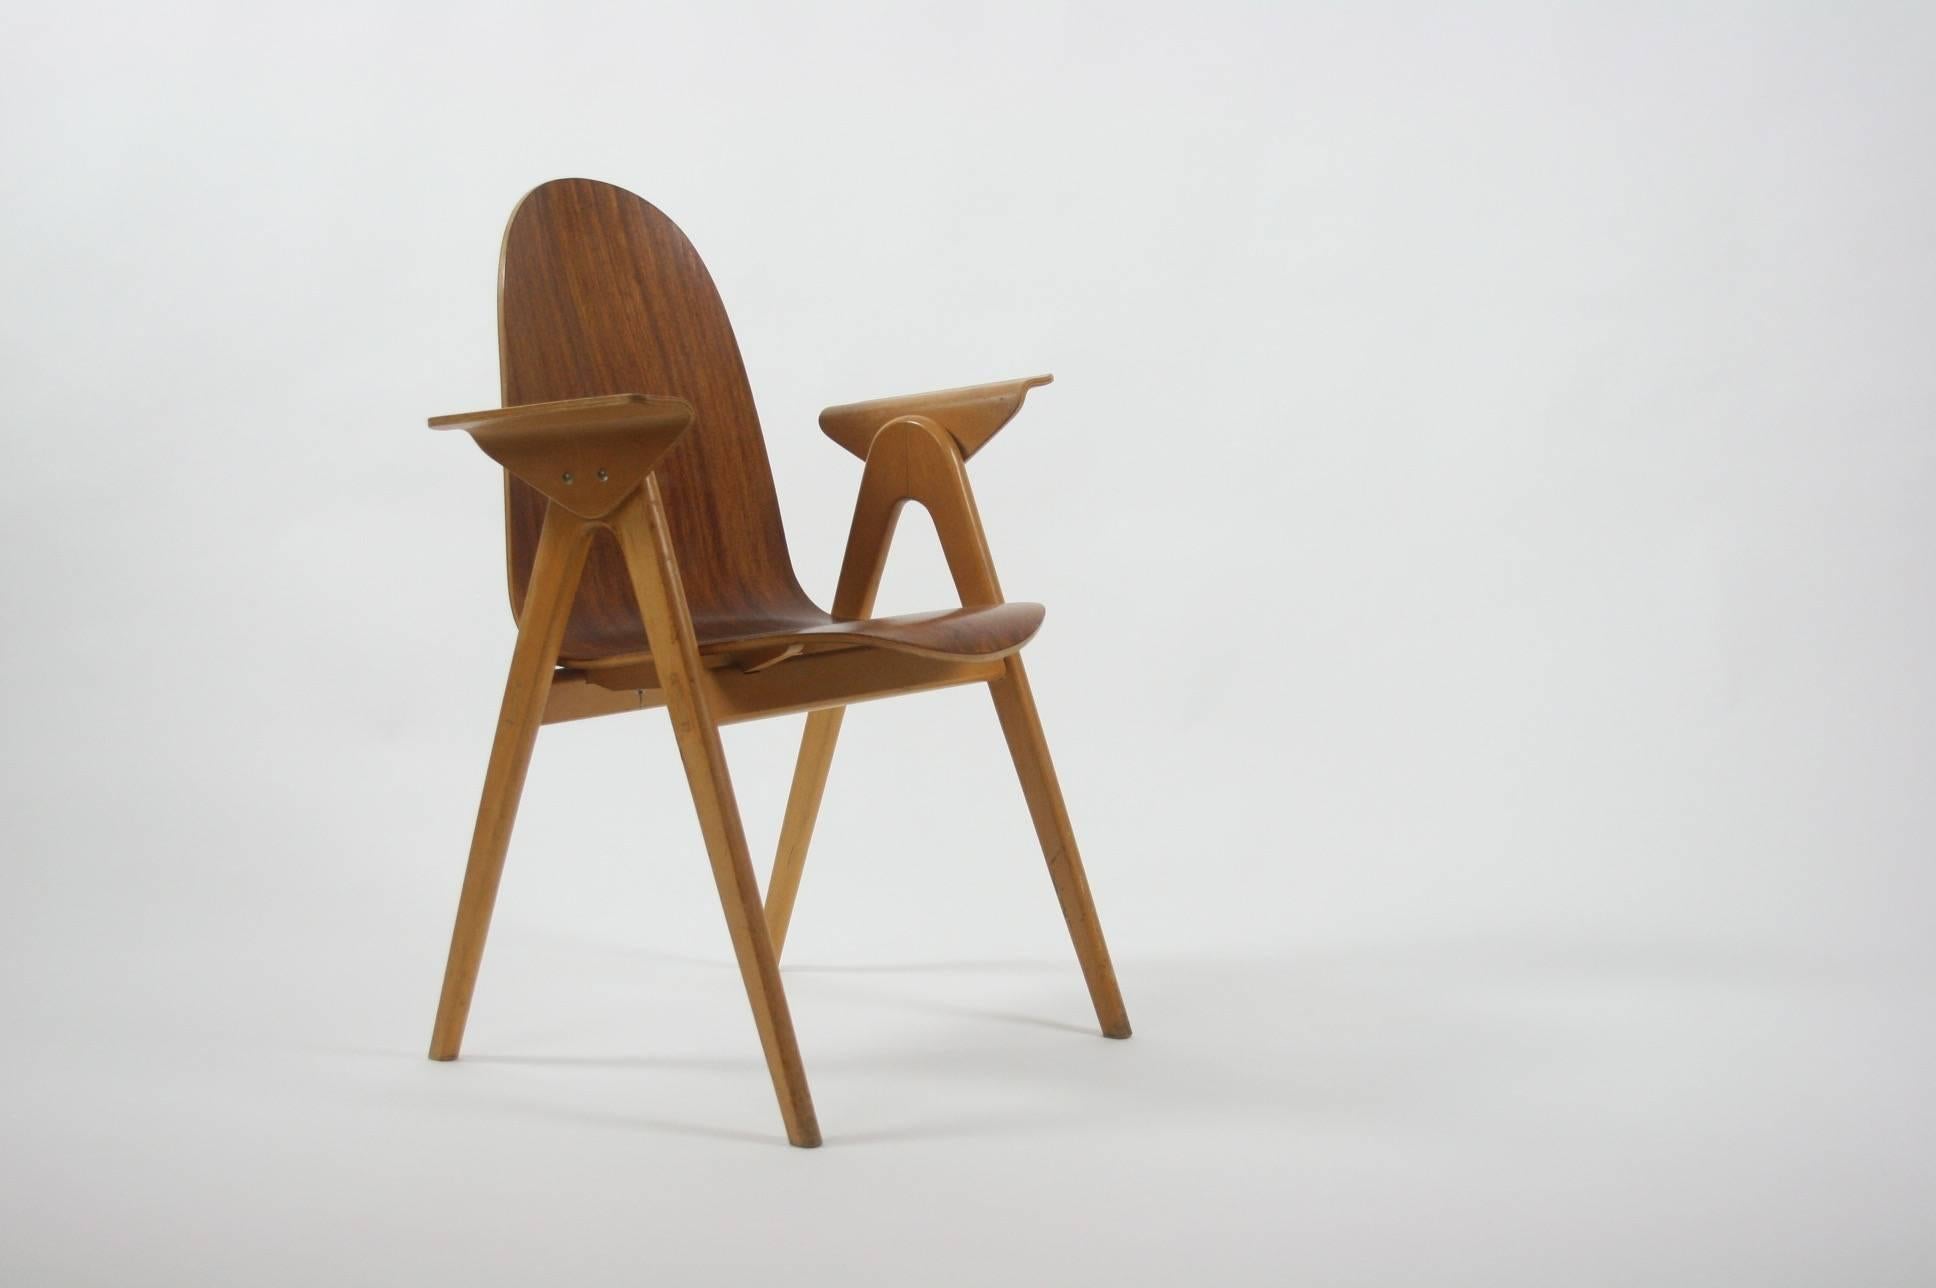 Teak plywood and beech molded chair.